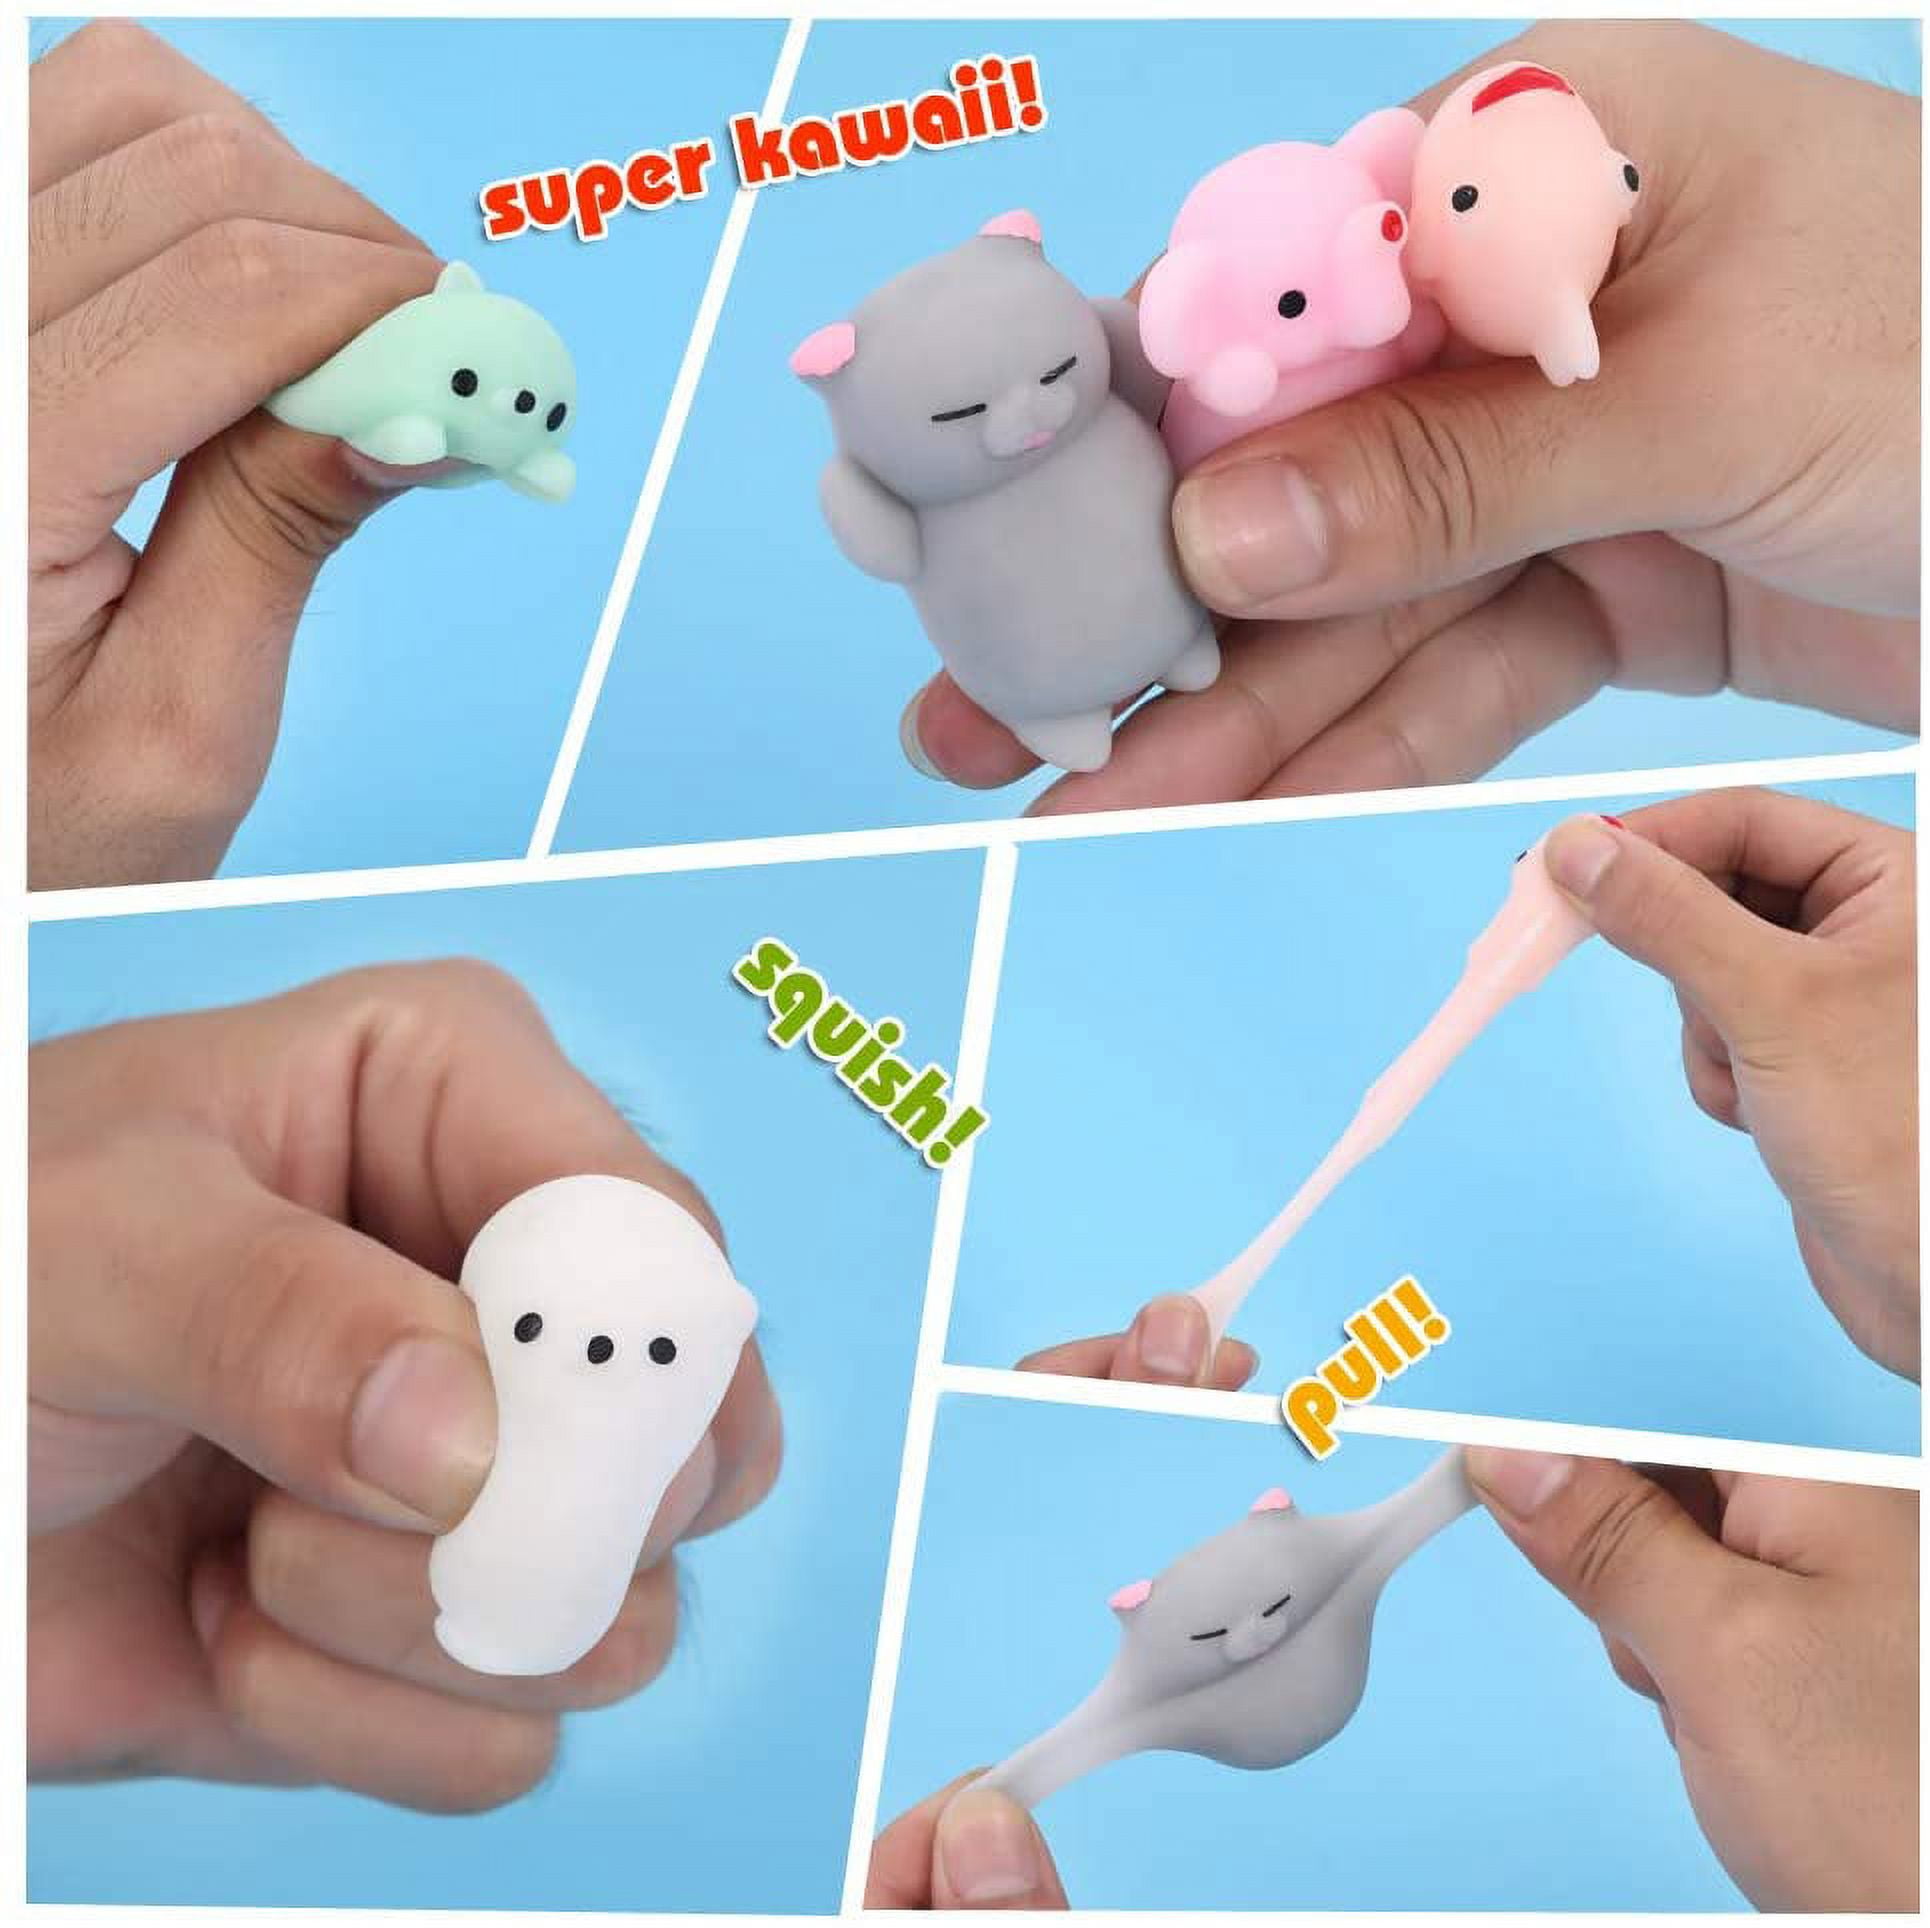 Mochi-Fun”: Squishy Toys for Kids, Party Favors & More! – Corano